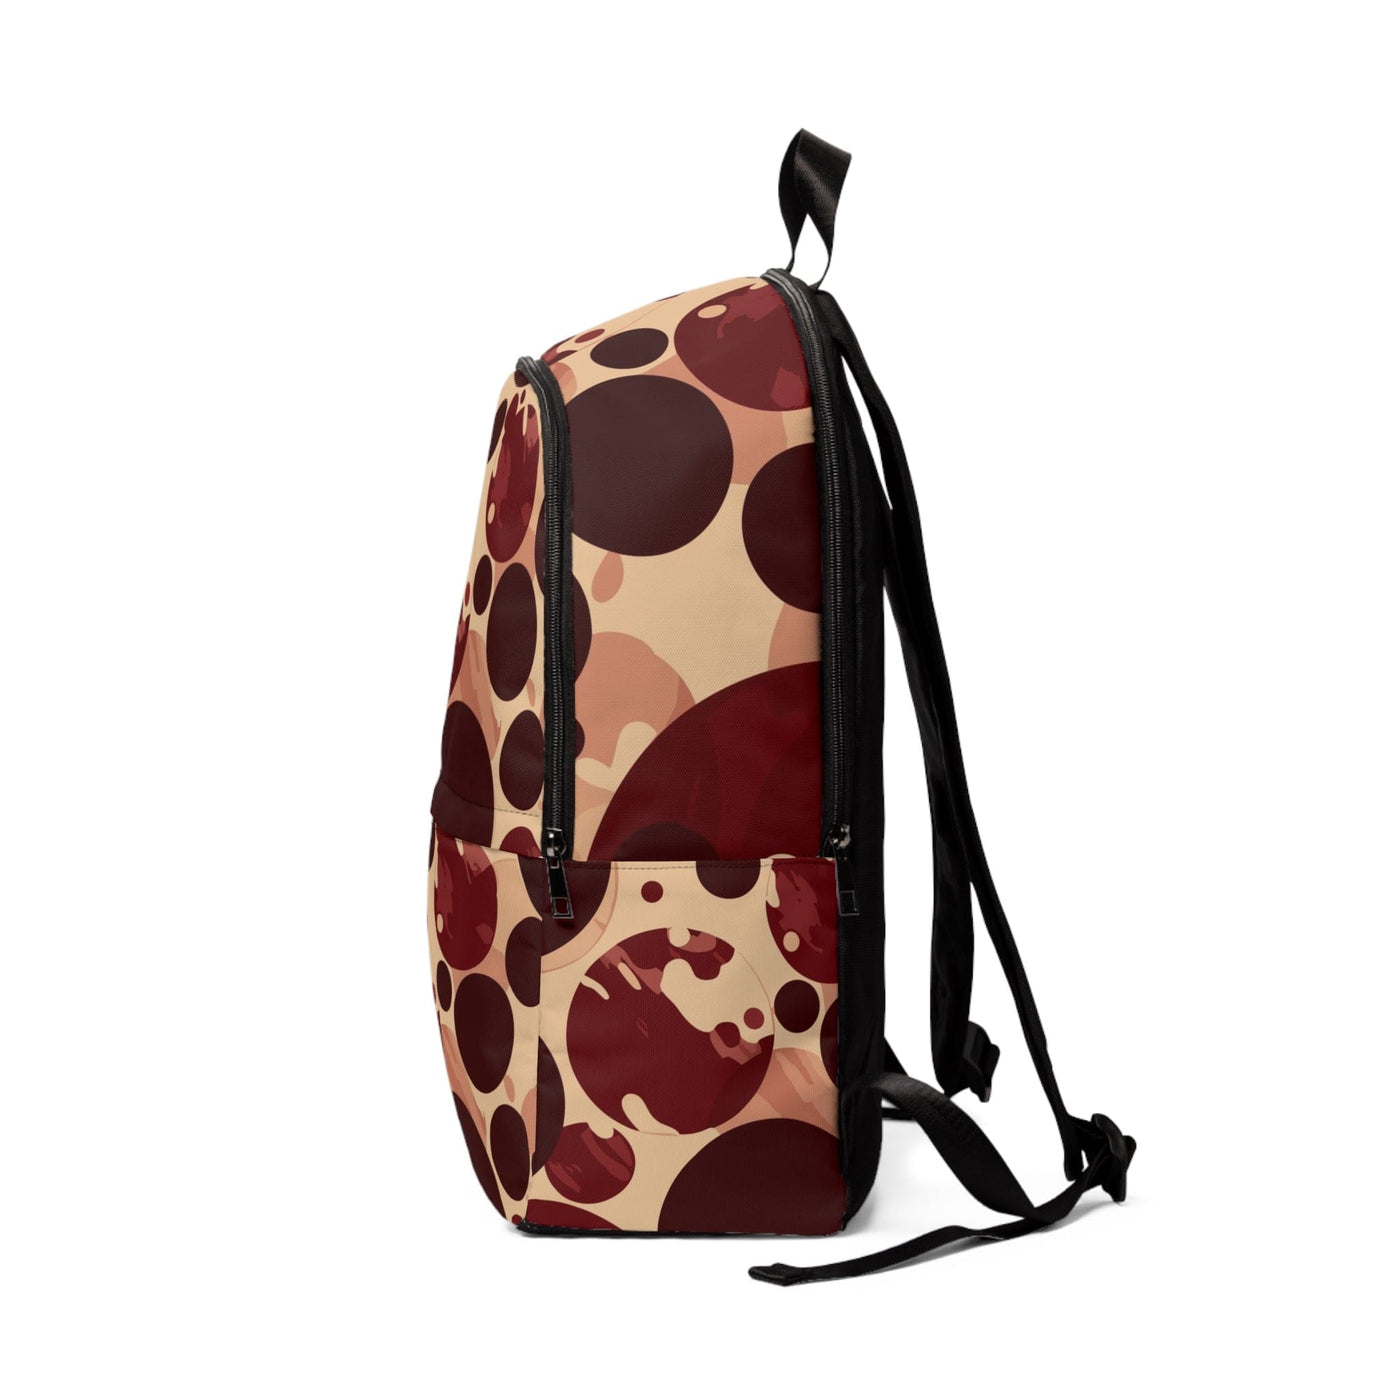 Fashion Backpack Waterproof Burgundy And Beige Circular Spotted Illustration